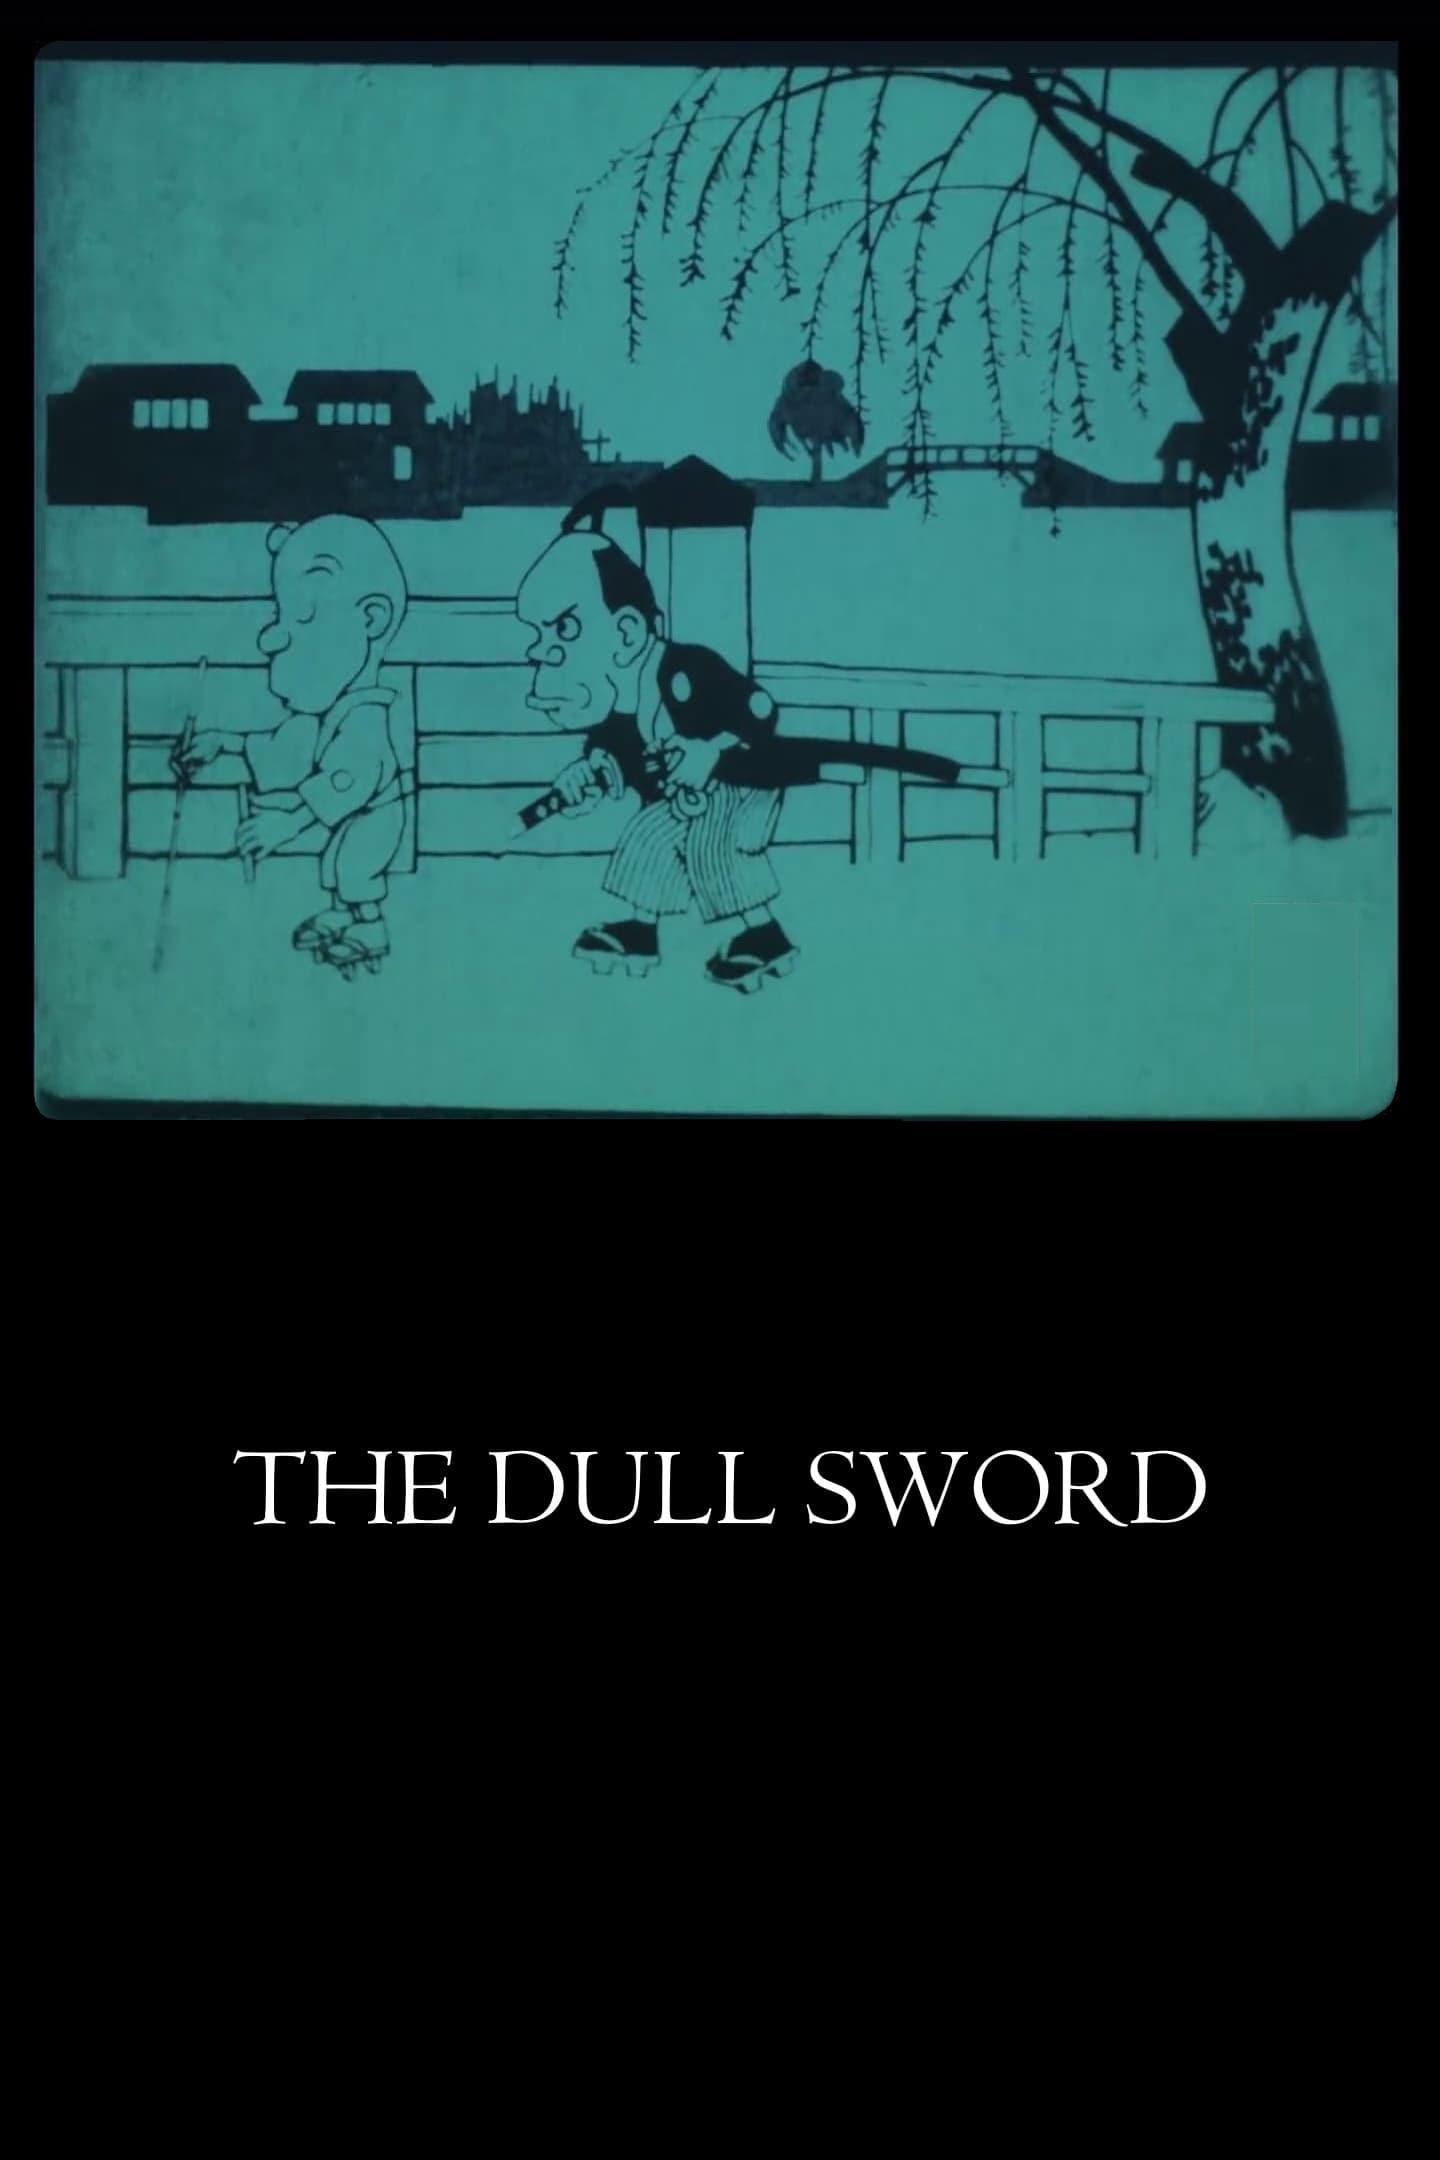 The Dull Sword poster